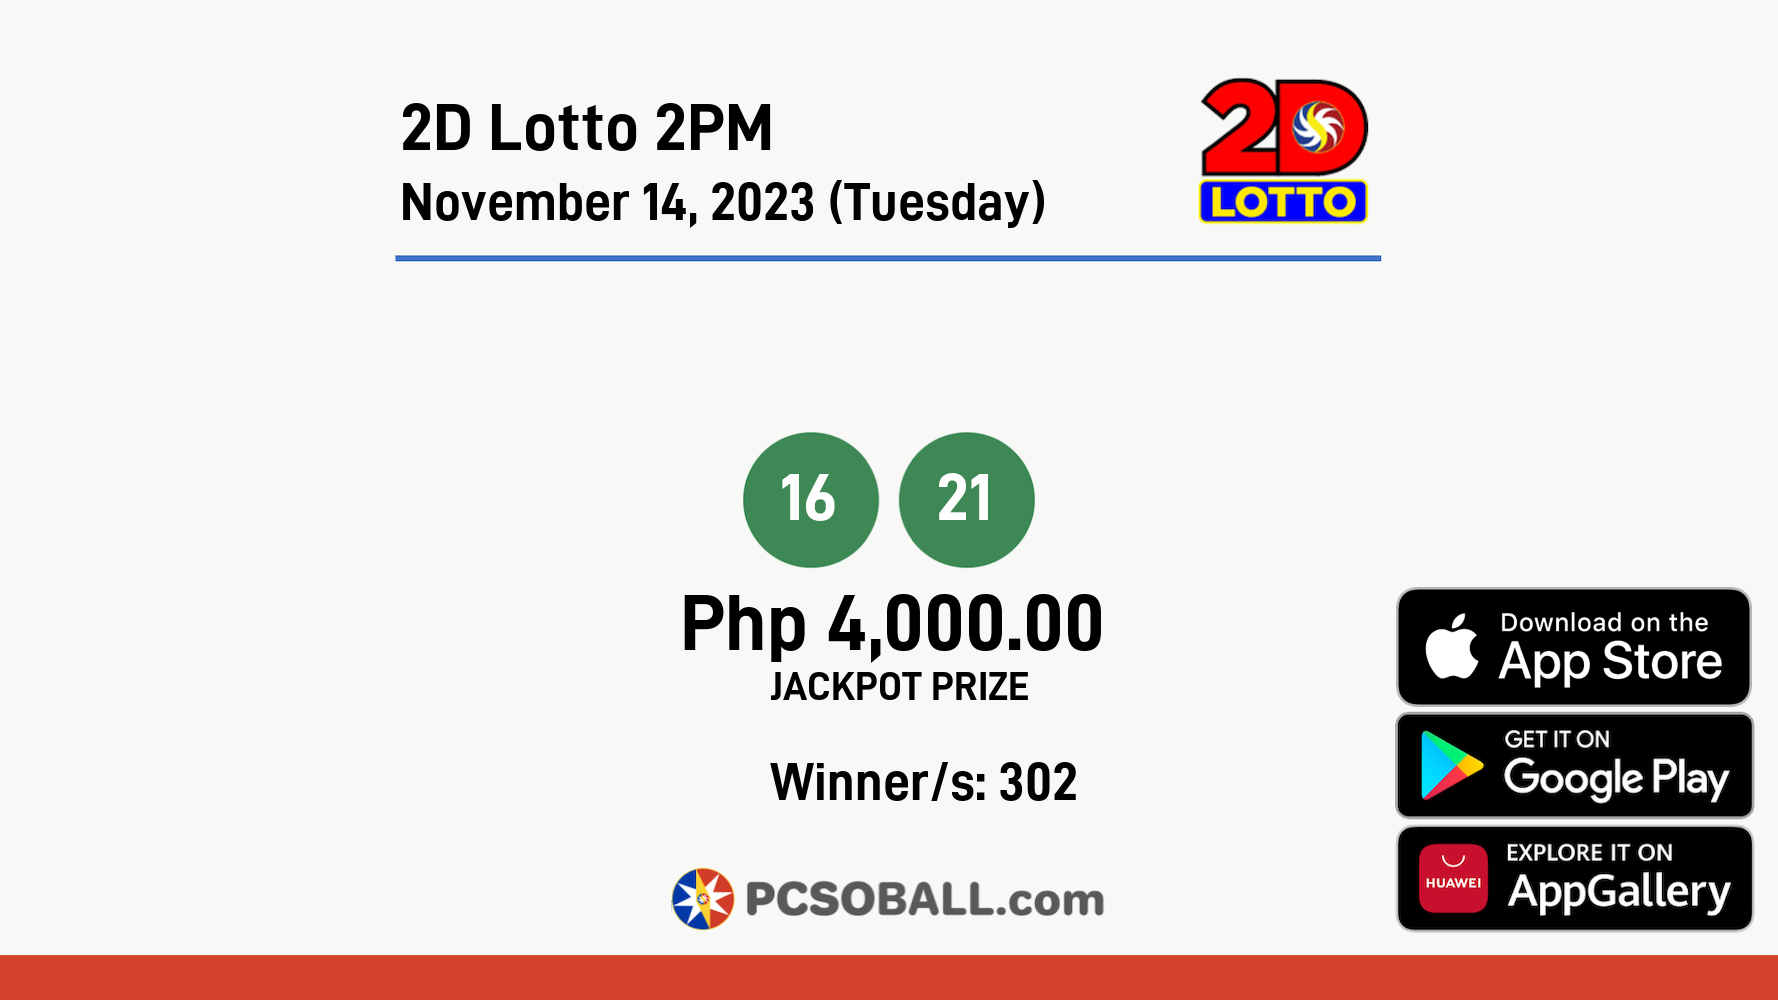 2D Lotto 2PM November 14, 2023 (Tuesday) Result